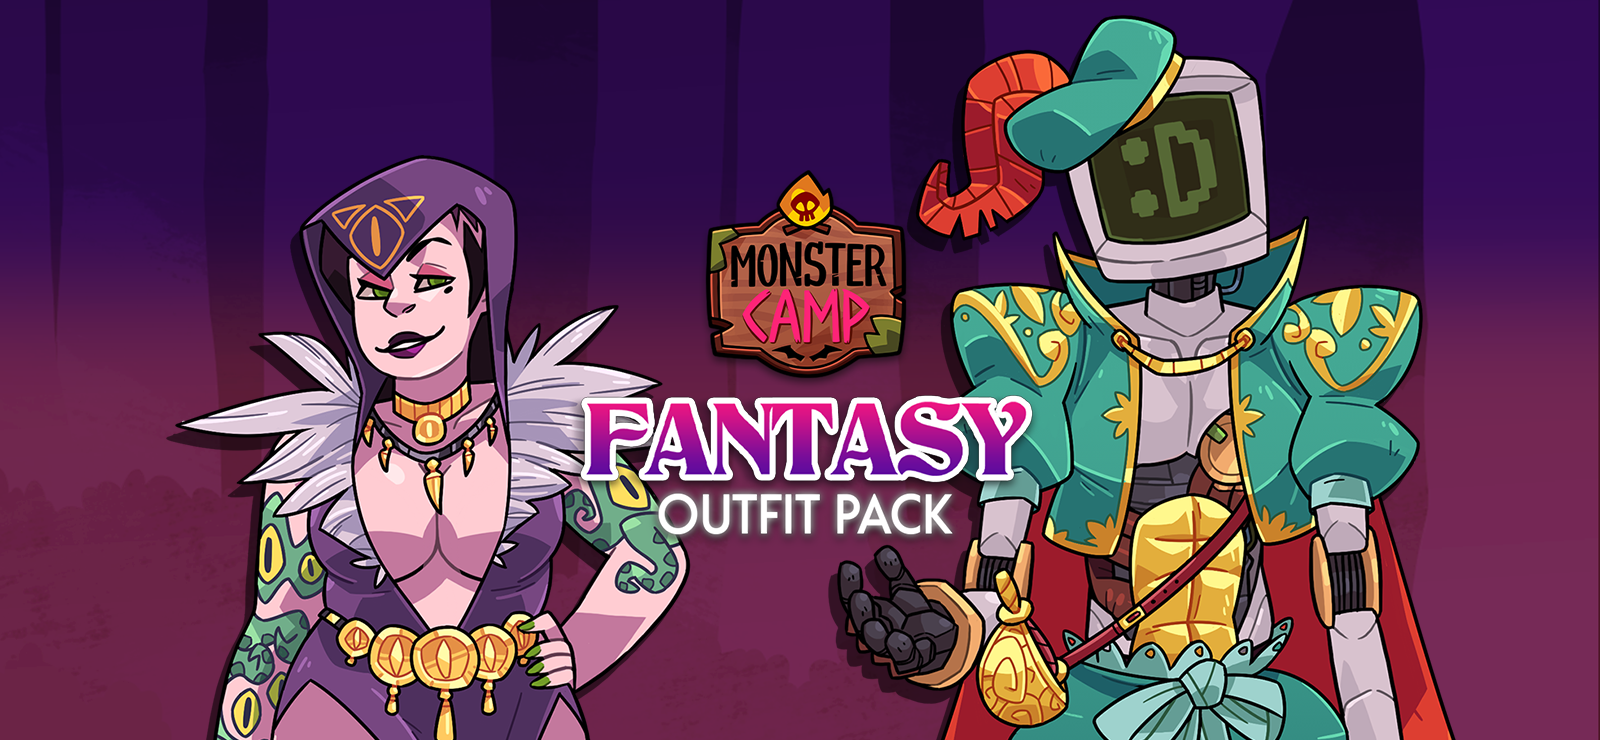 Monster Camp Outfit Pack - Fantasy